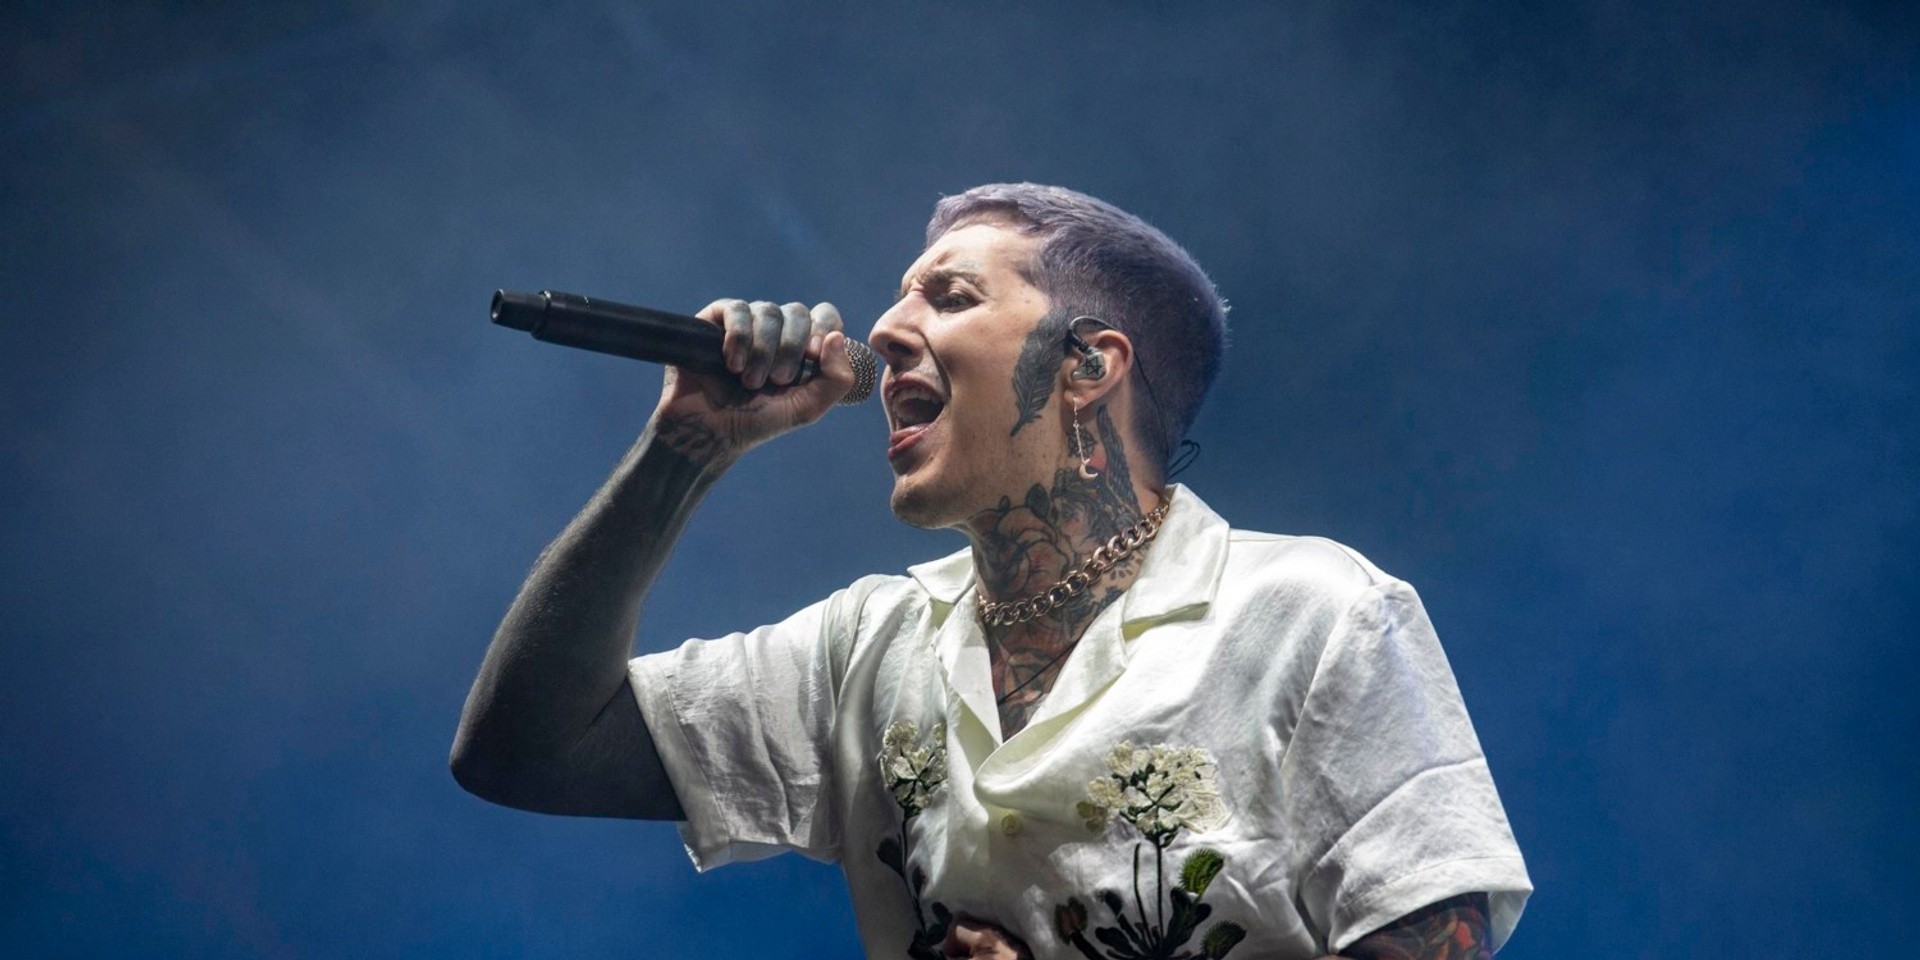 Bring Me The Horizon releases new music video, ‘Mother Tongue’ – watch